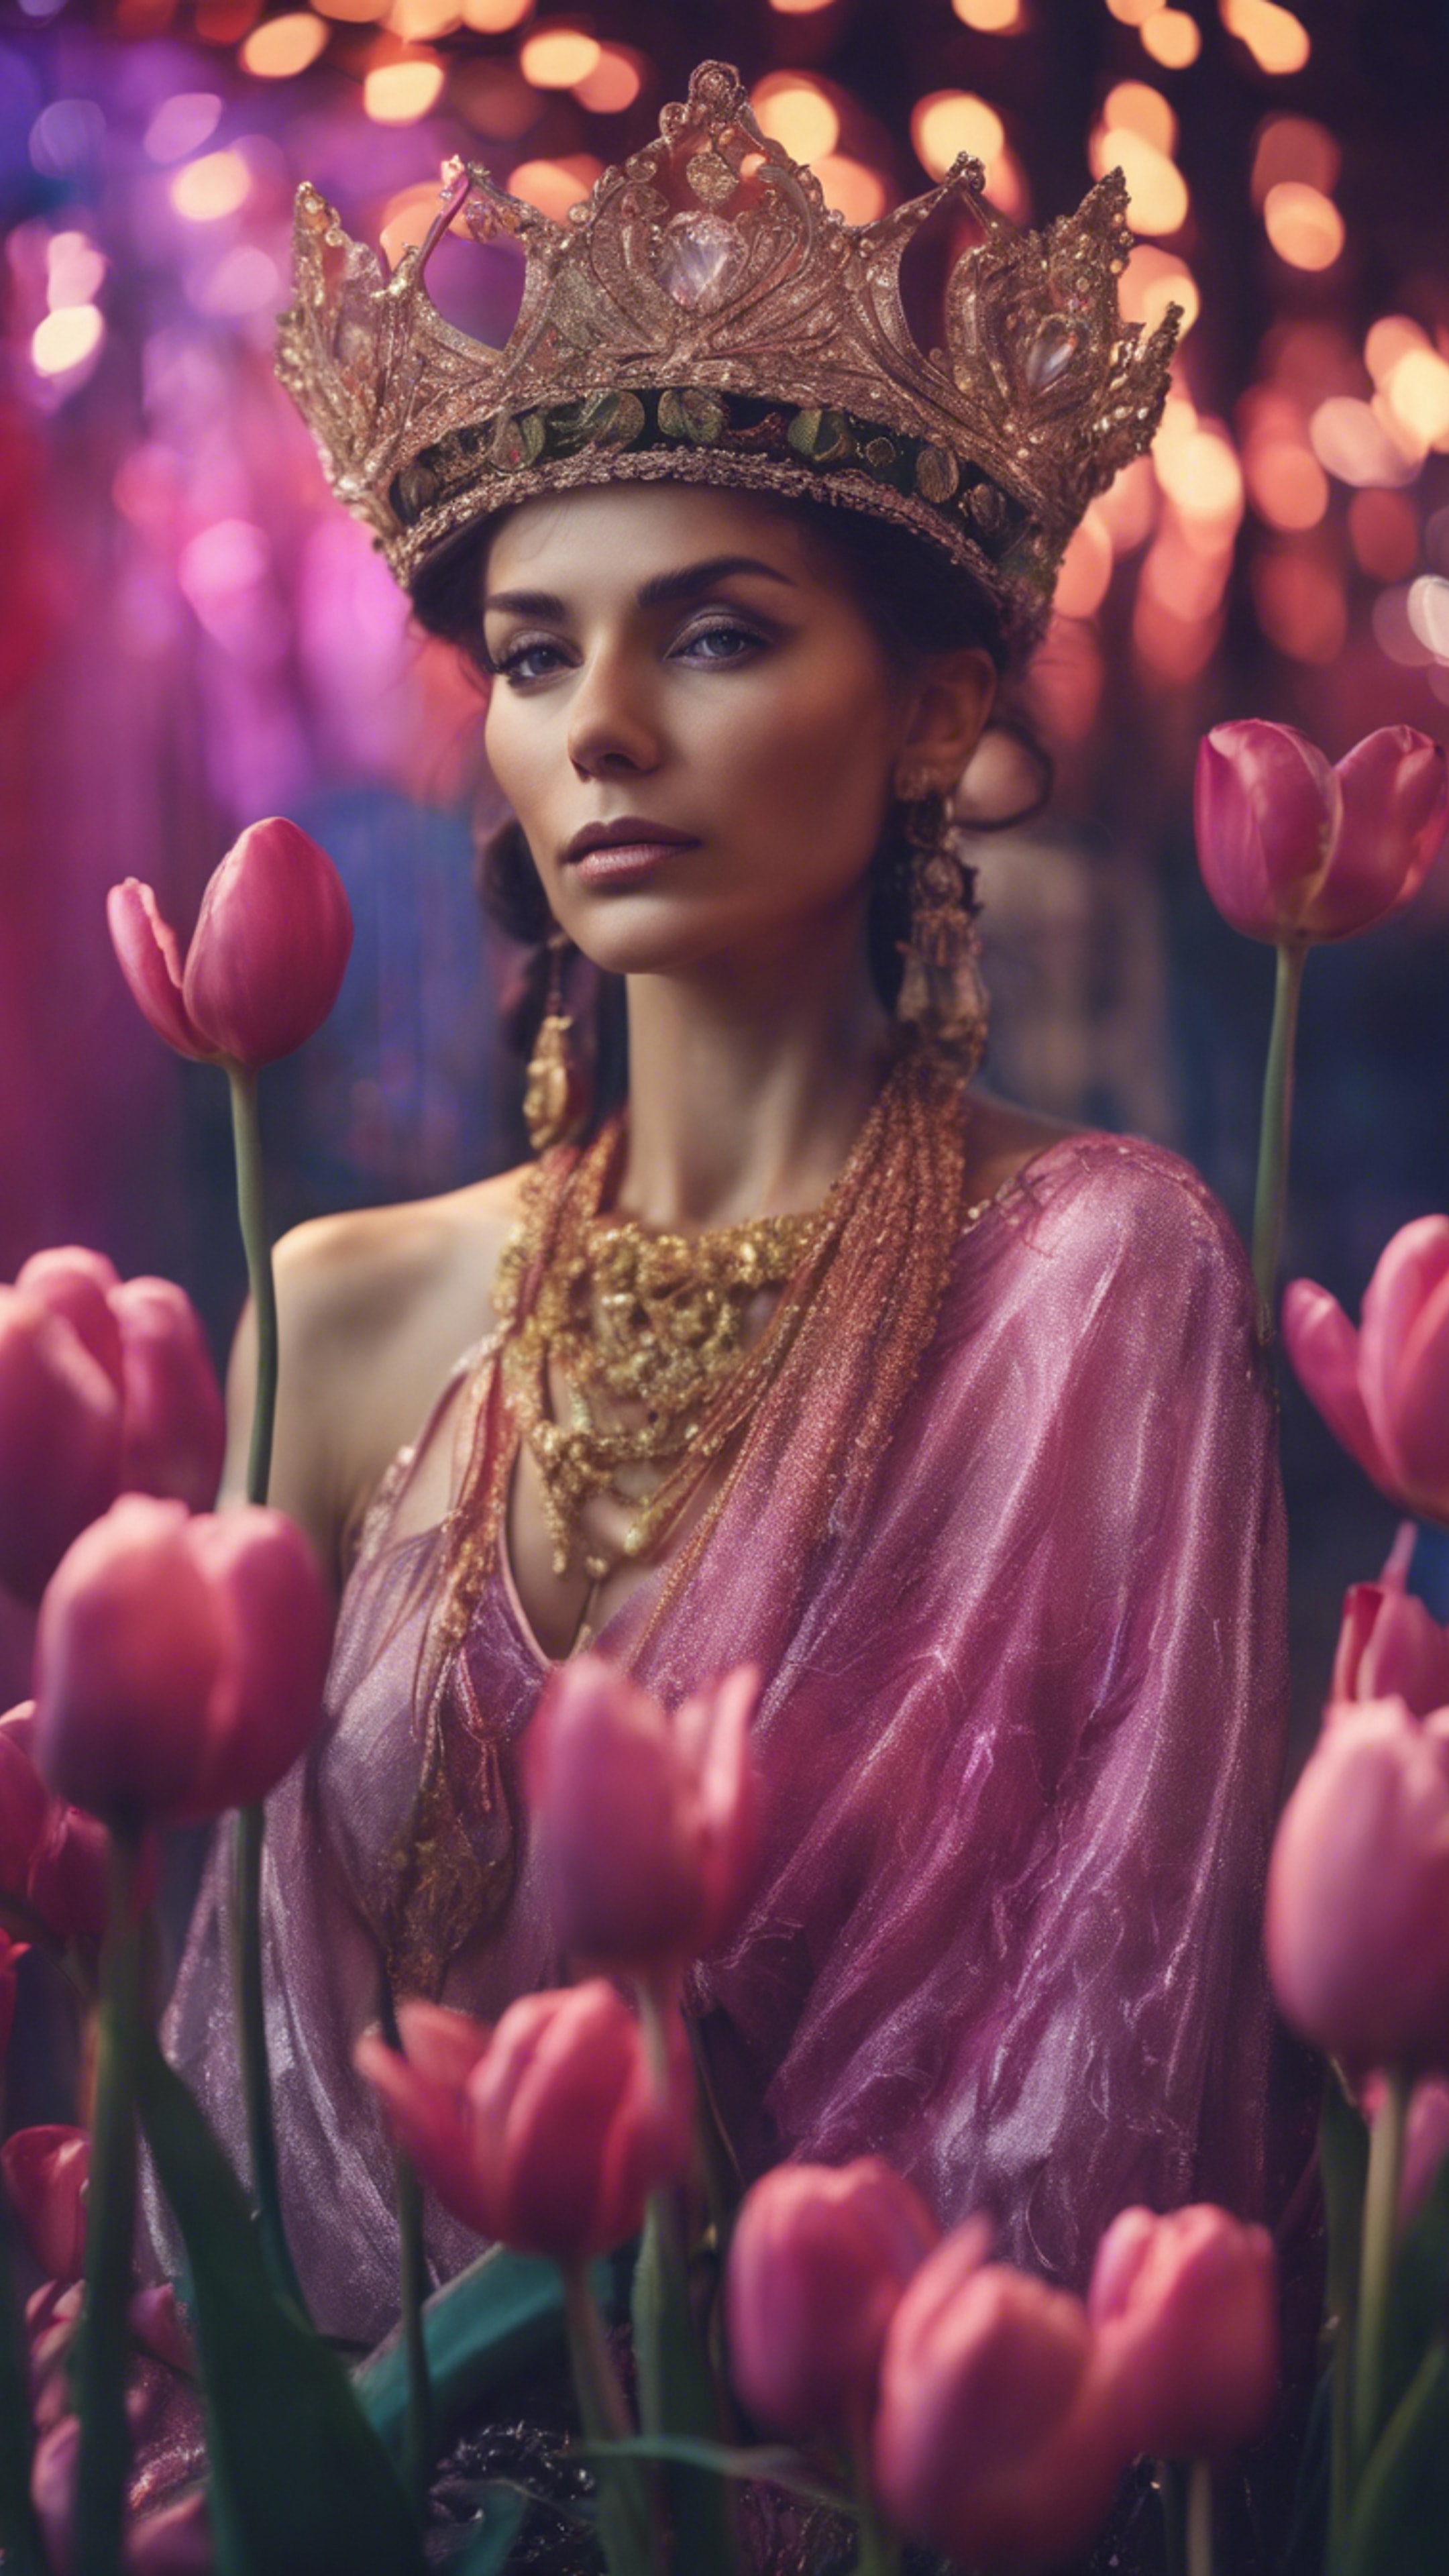 A beautiful mystic woman wearing a crown made of neon tulips. Wallpaper[660170d197cd4563a83b]